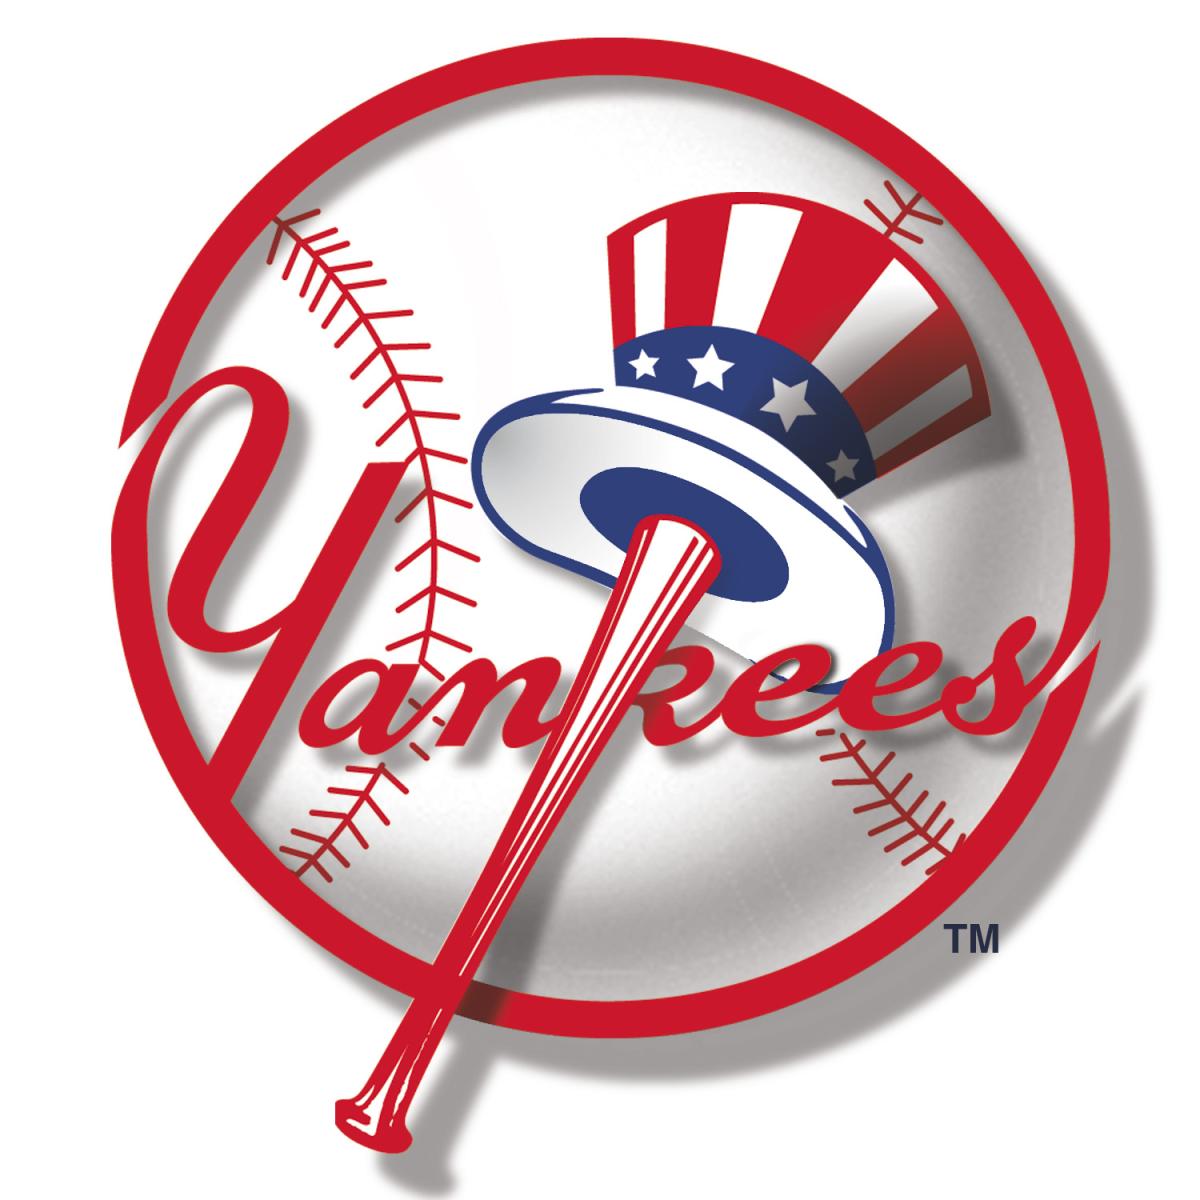 Image of the NY Yankees Logo. A baseball with red outline and stitching, "Yankees" written out in red lettering with, a baseball bat with a red and white striped hat with a blue band and white stars on the top end of the bat. 